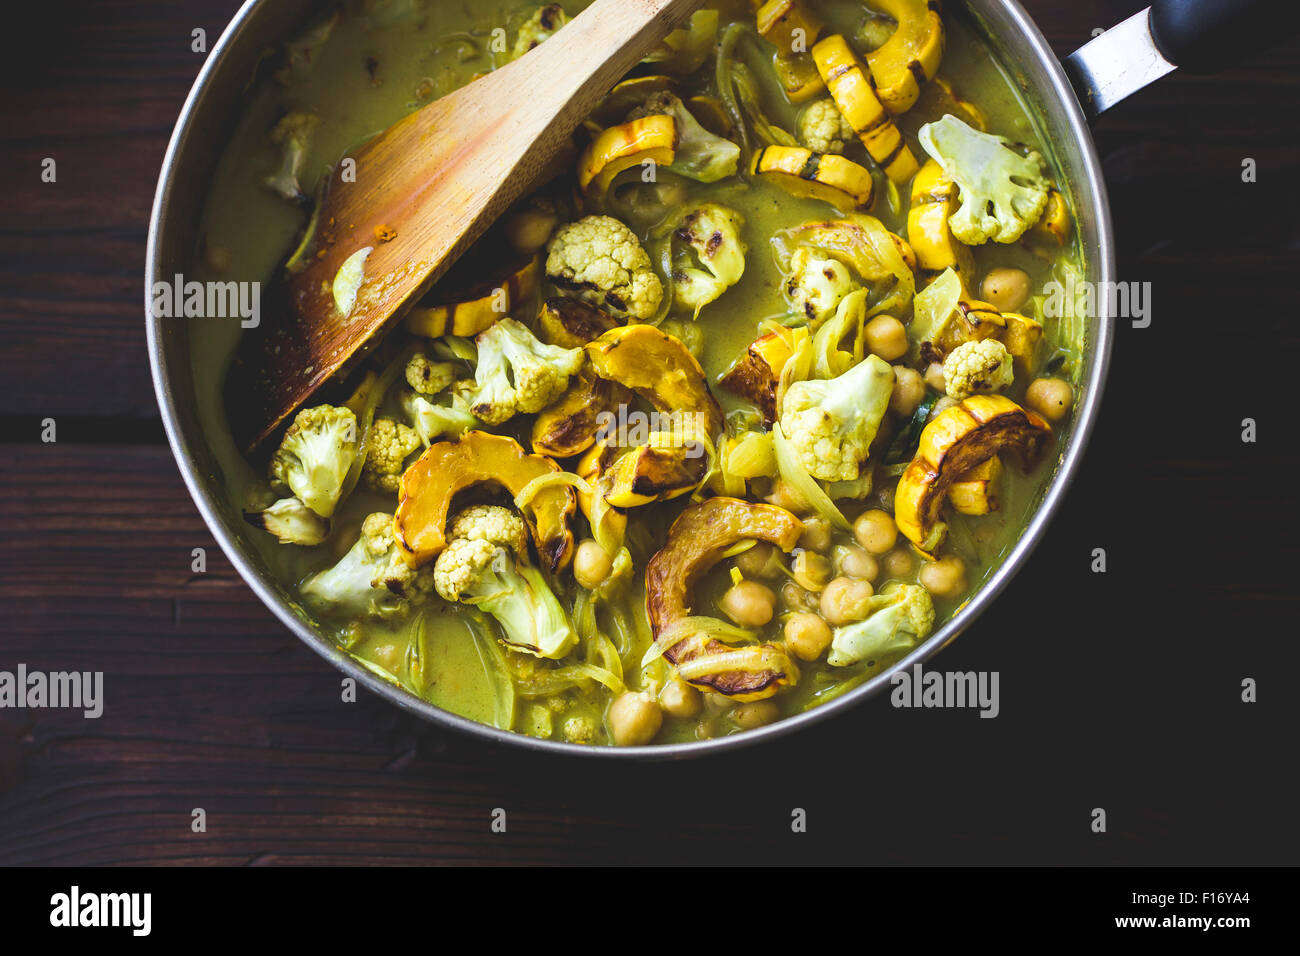 Roasted delicata squash curry with chickpeas and cauliflower. Stock Photo